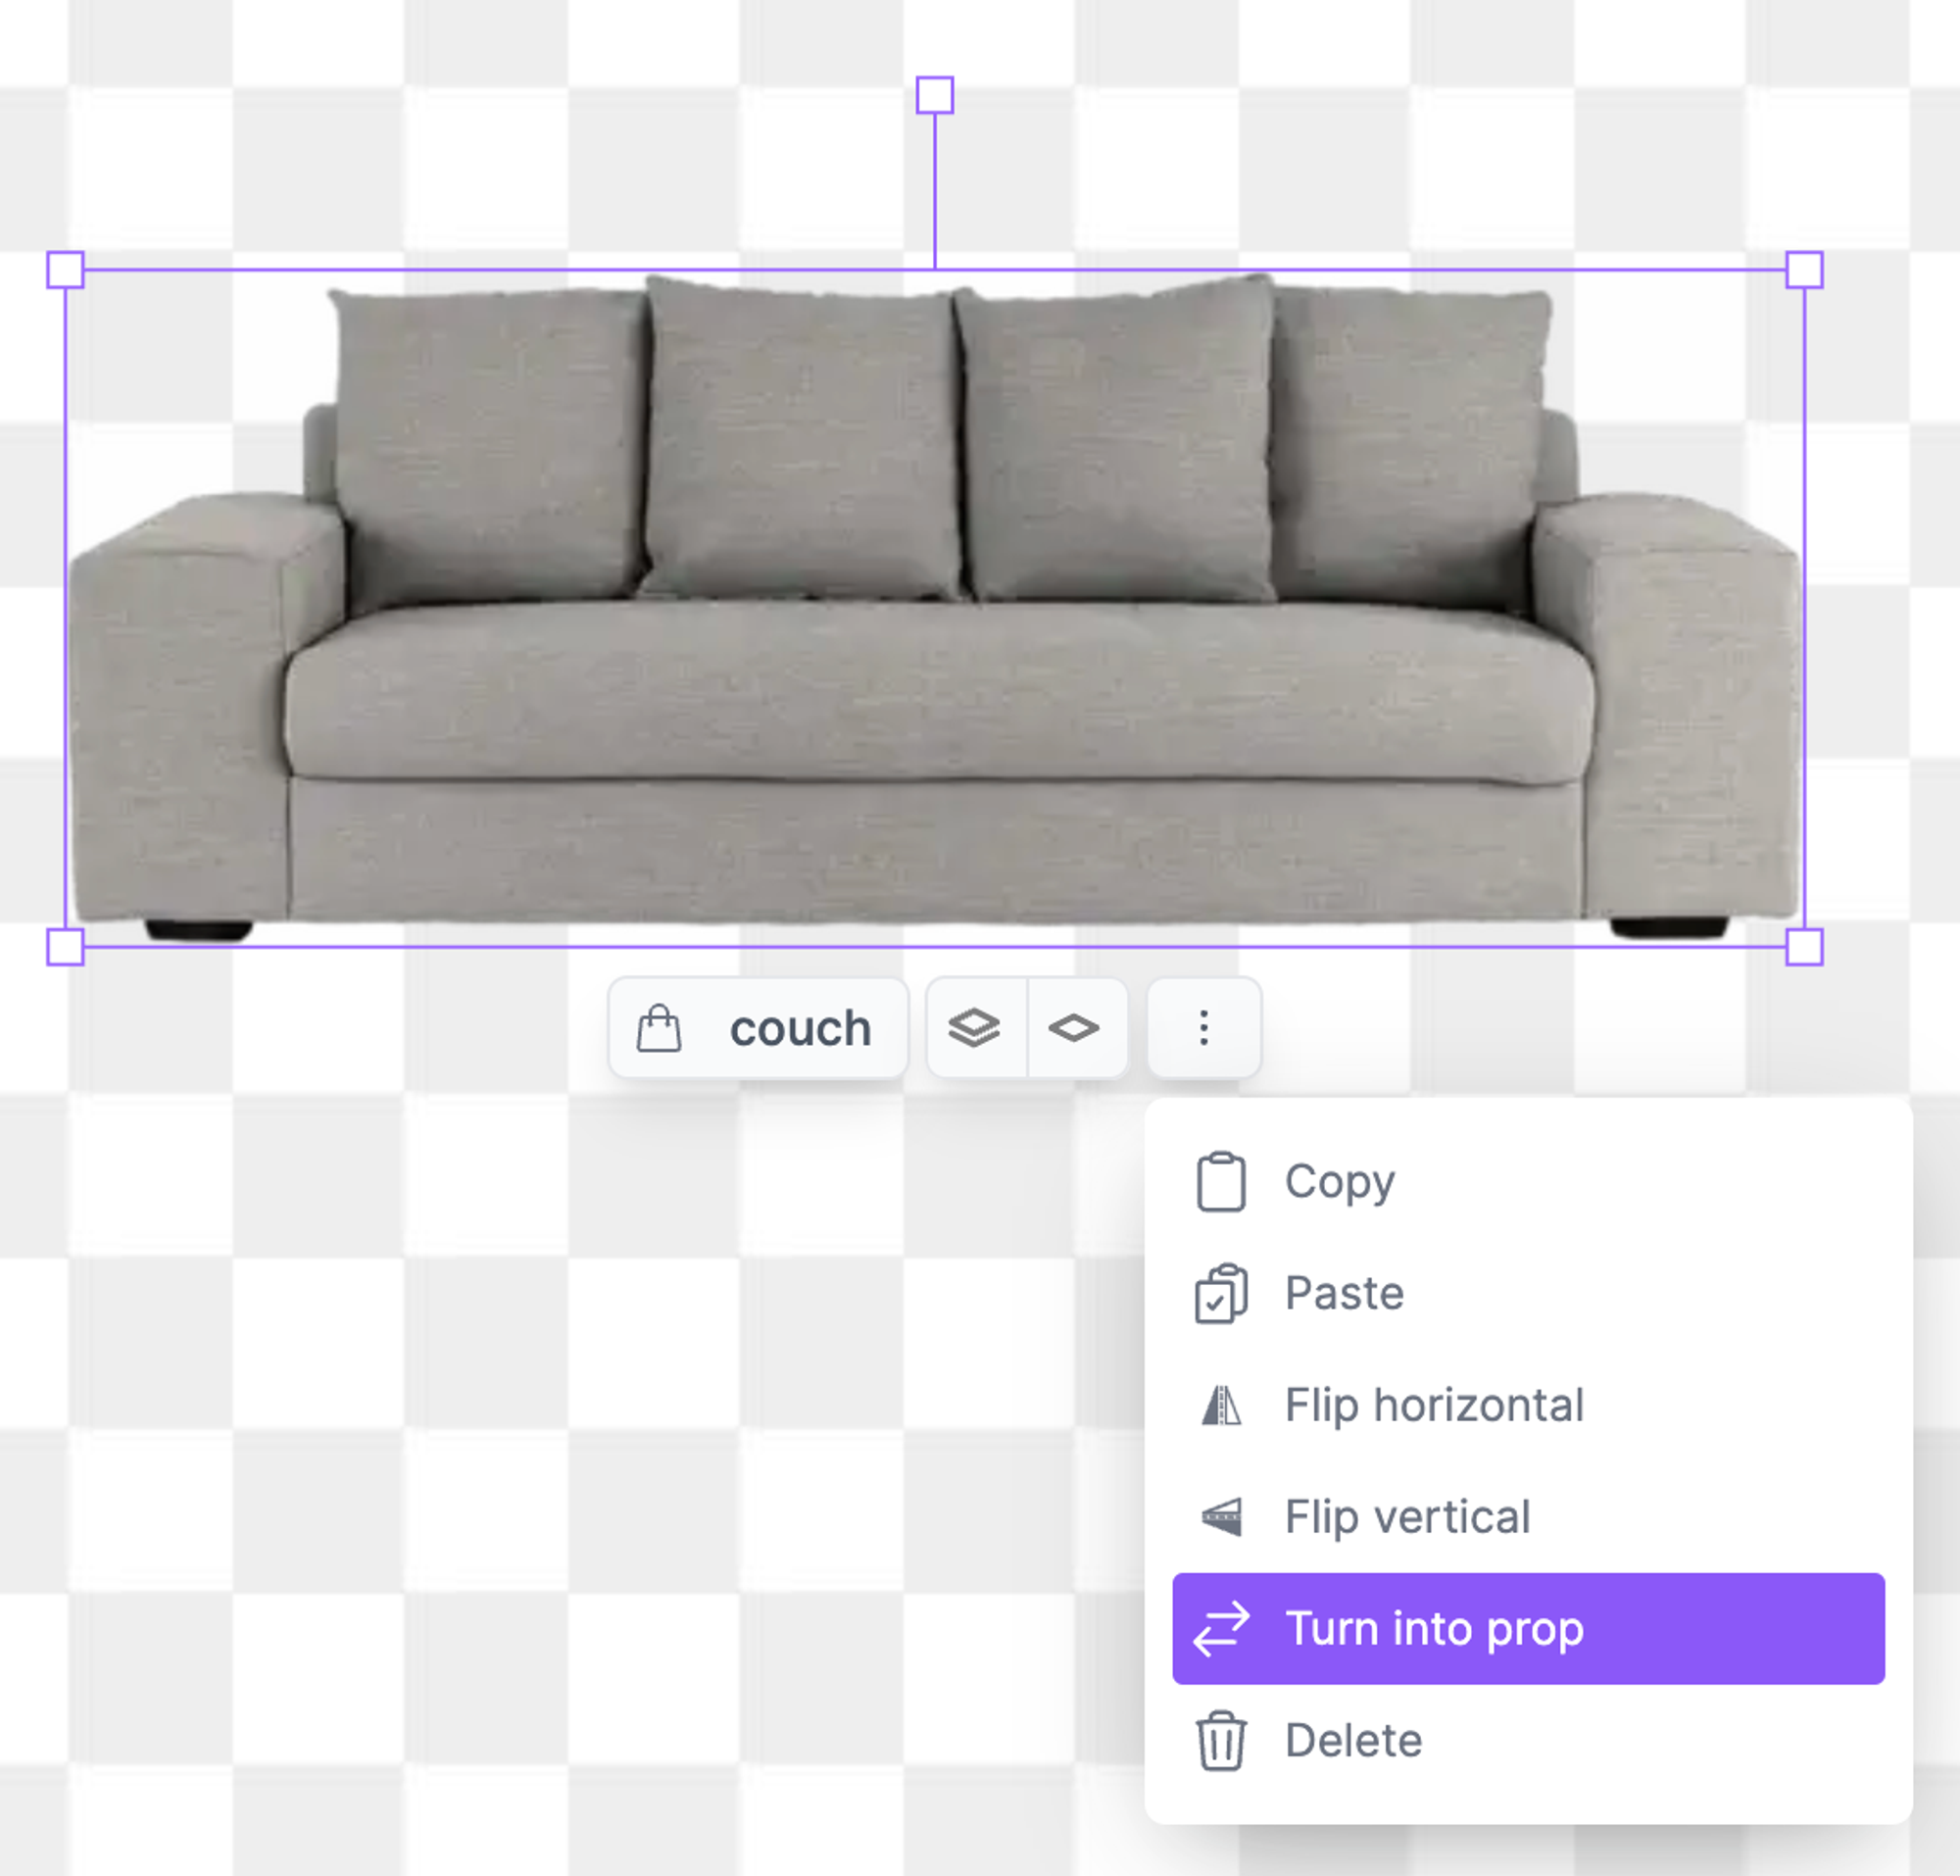 This will generate images with THIS specific couch